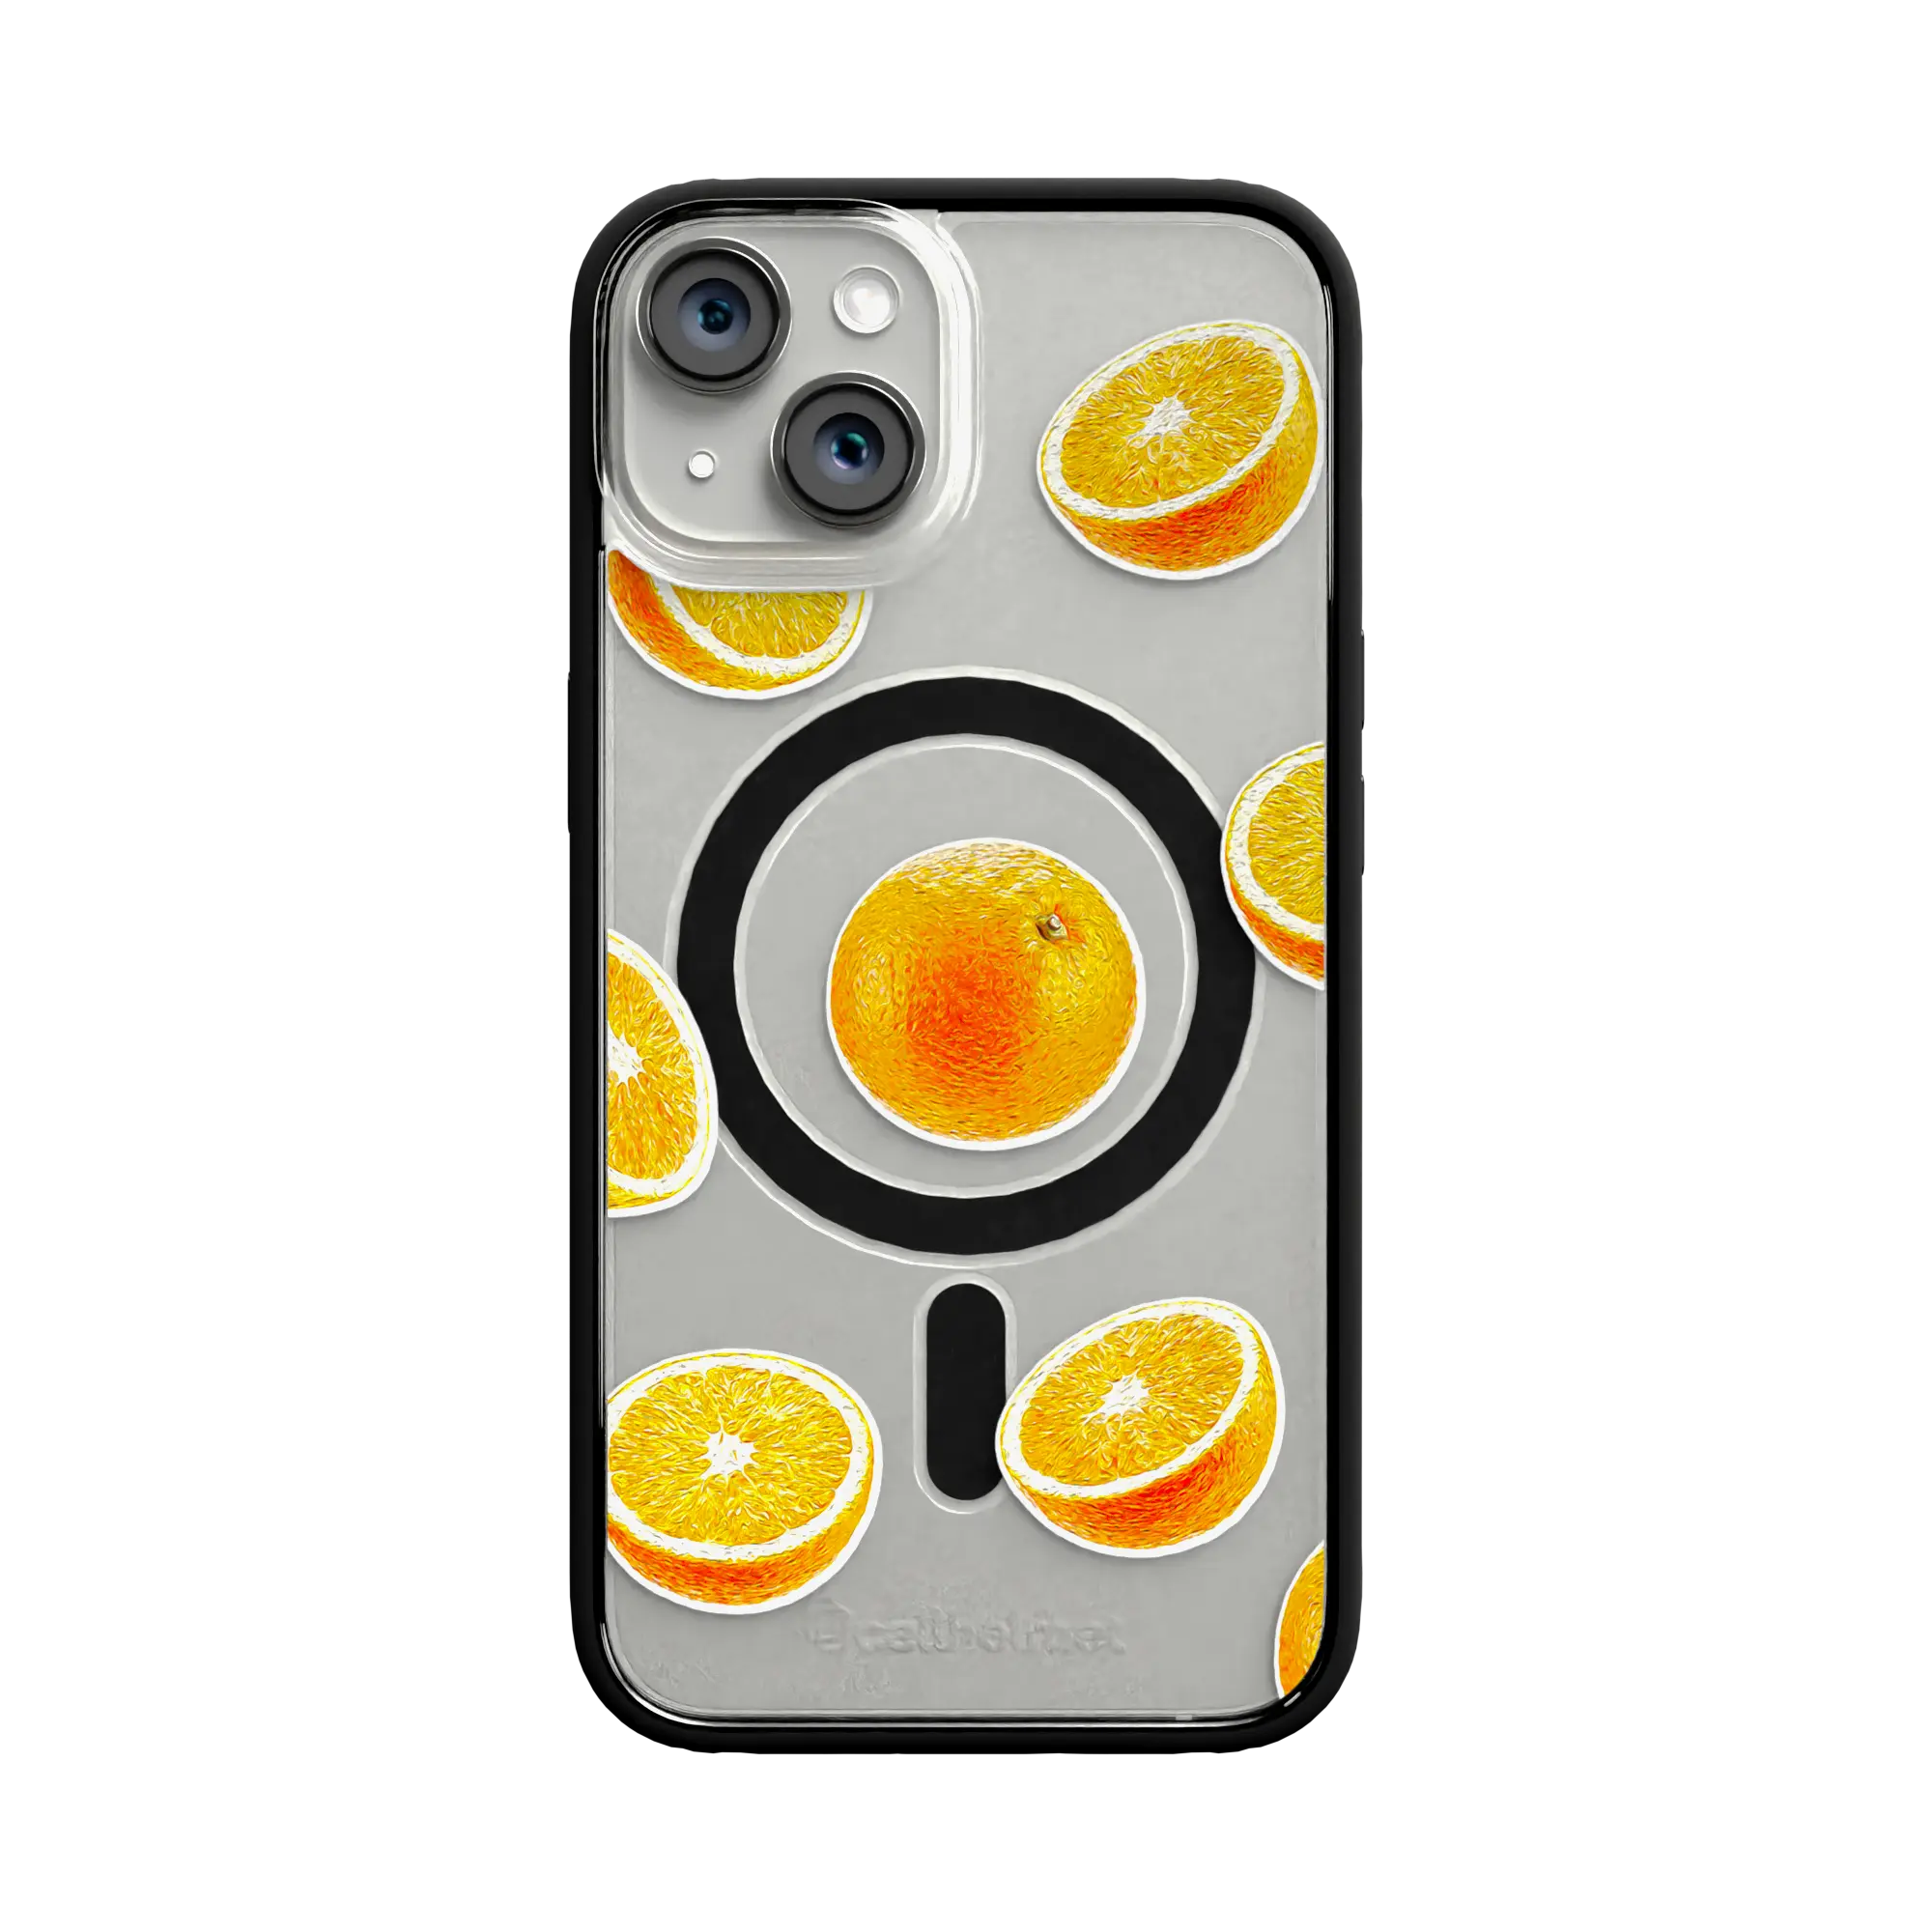 Apple-iPhone-13-Crystal-Clear Orange Zest | Protective MagSafe Case | Fruits Collection for Apple iPhone 13 Series cellhelmet cellhelmet